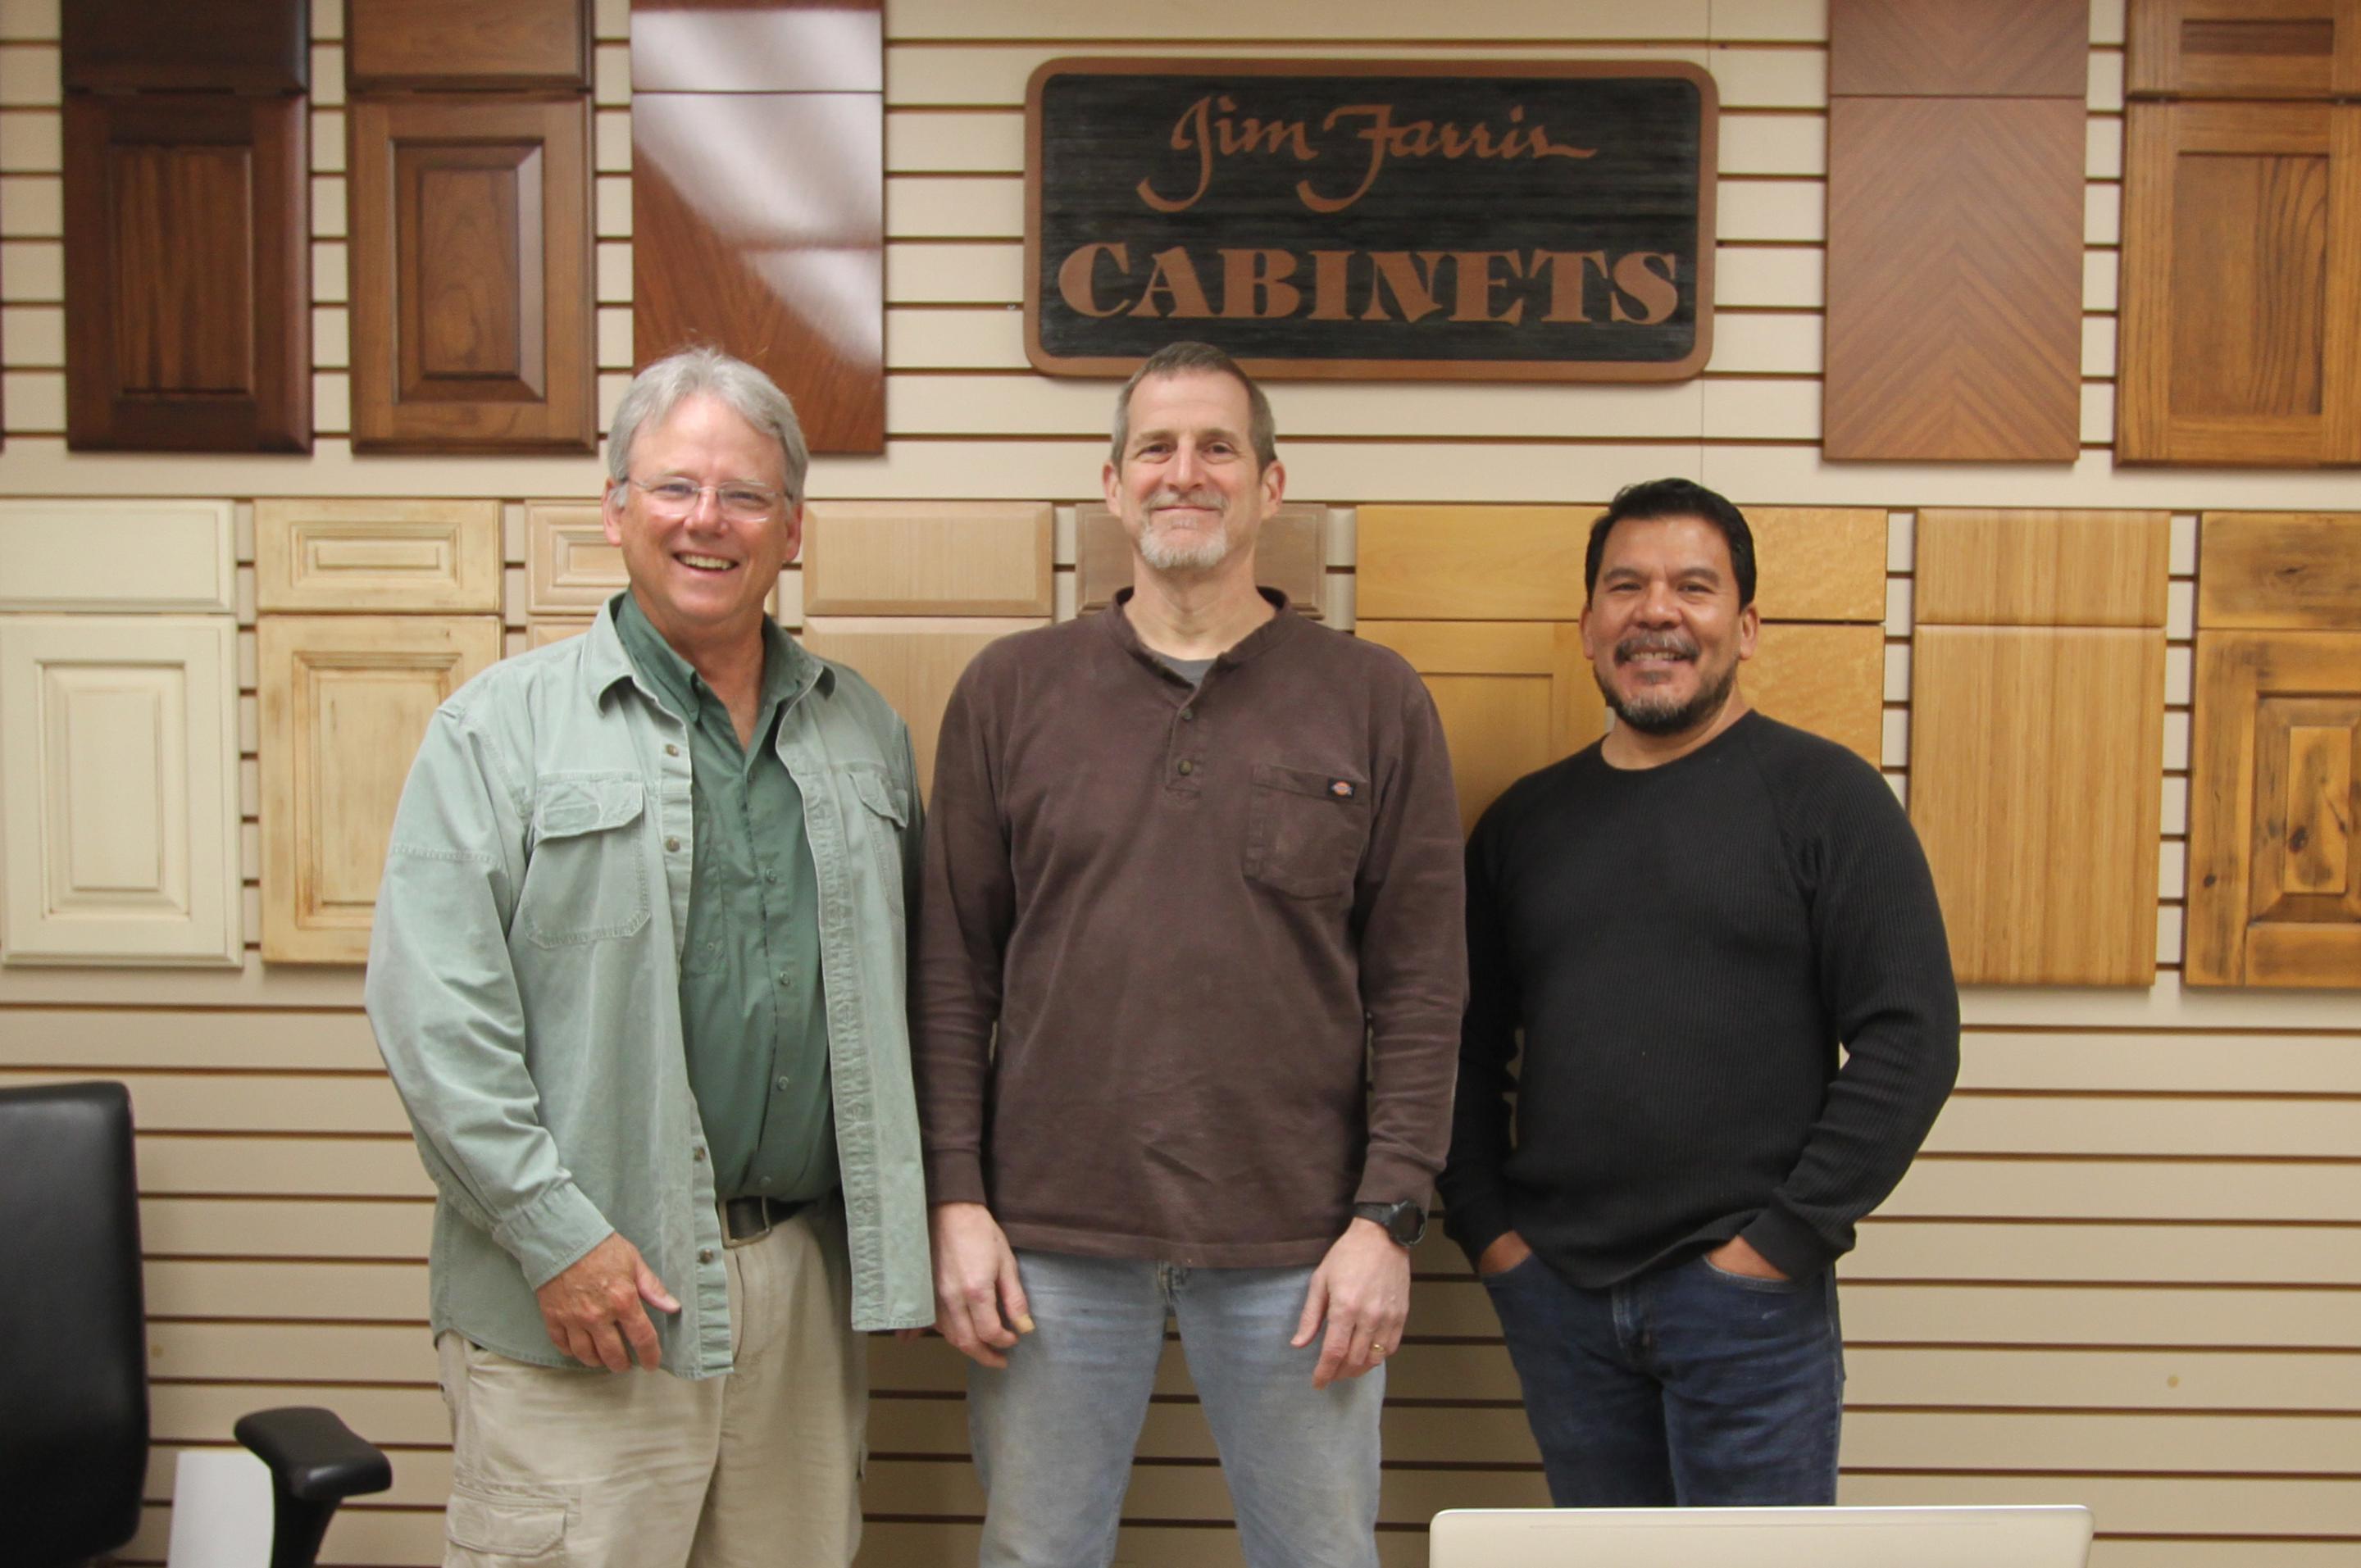 April 2019 – “Art Imitating Life” – an article about Jim Farris Cabinets from Houston Construction News